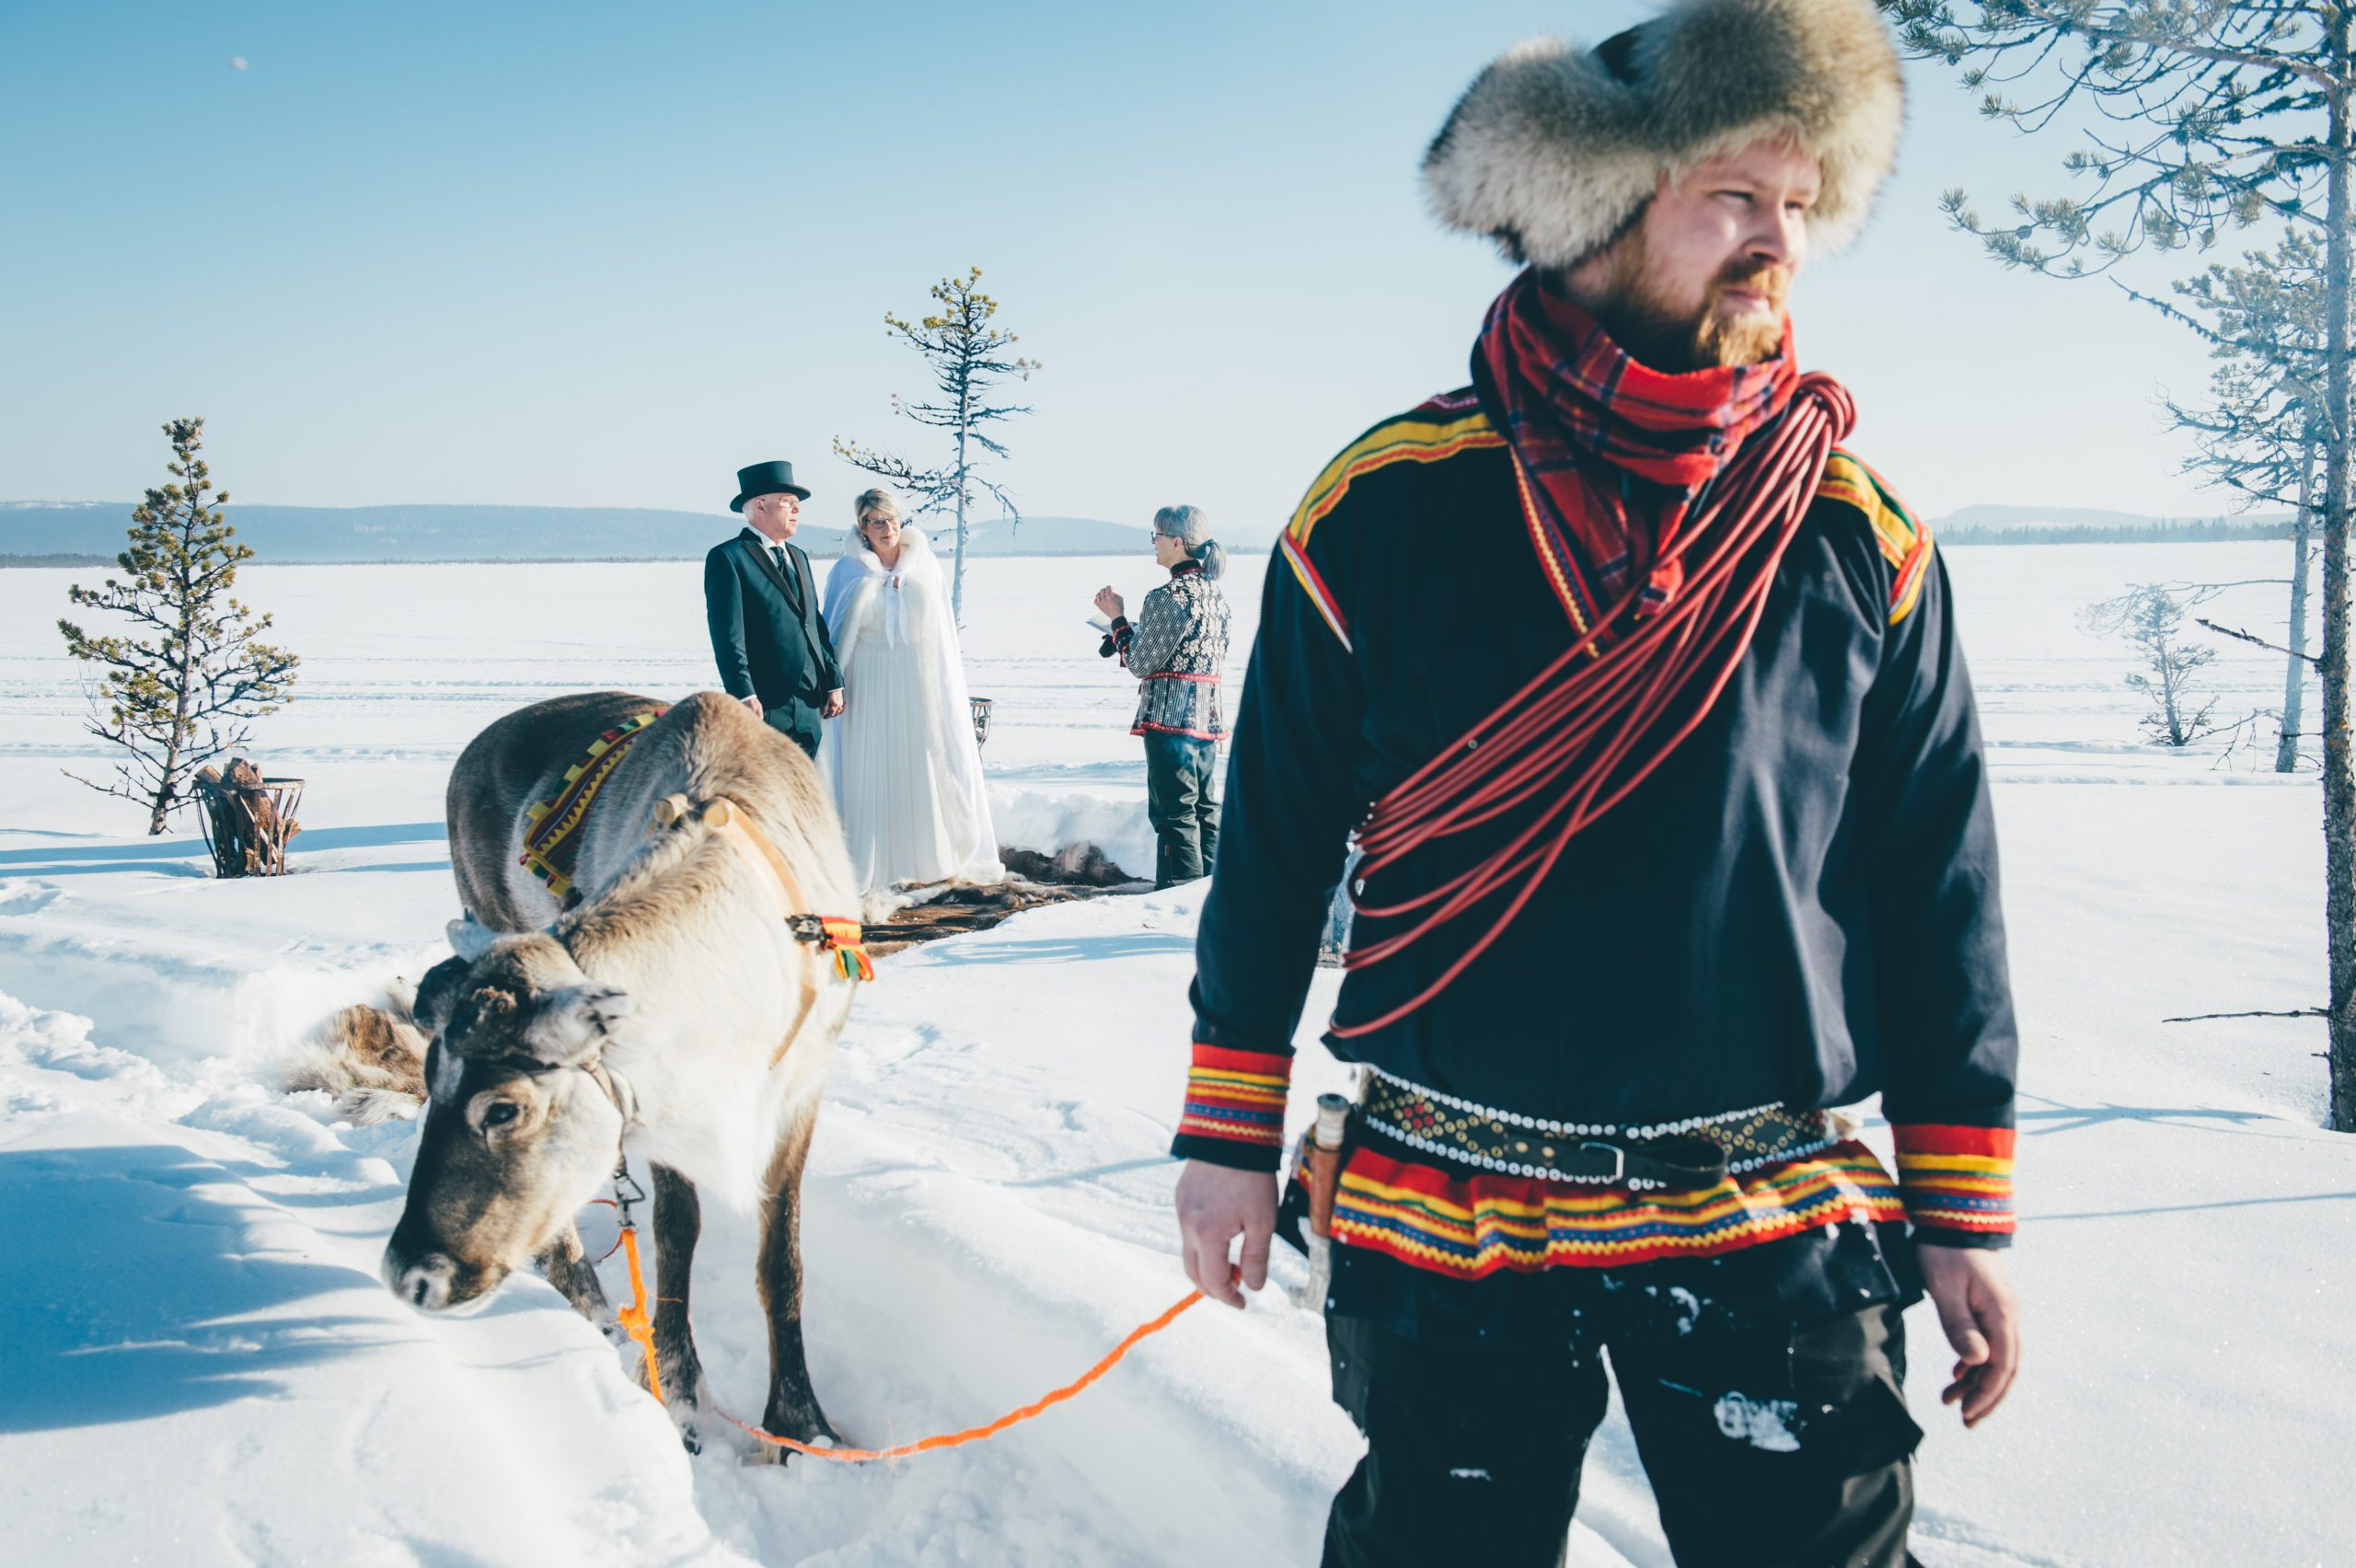 A Sami guide bring a couple to their wedding in the wilderness